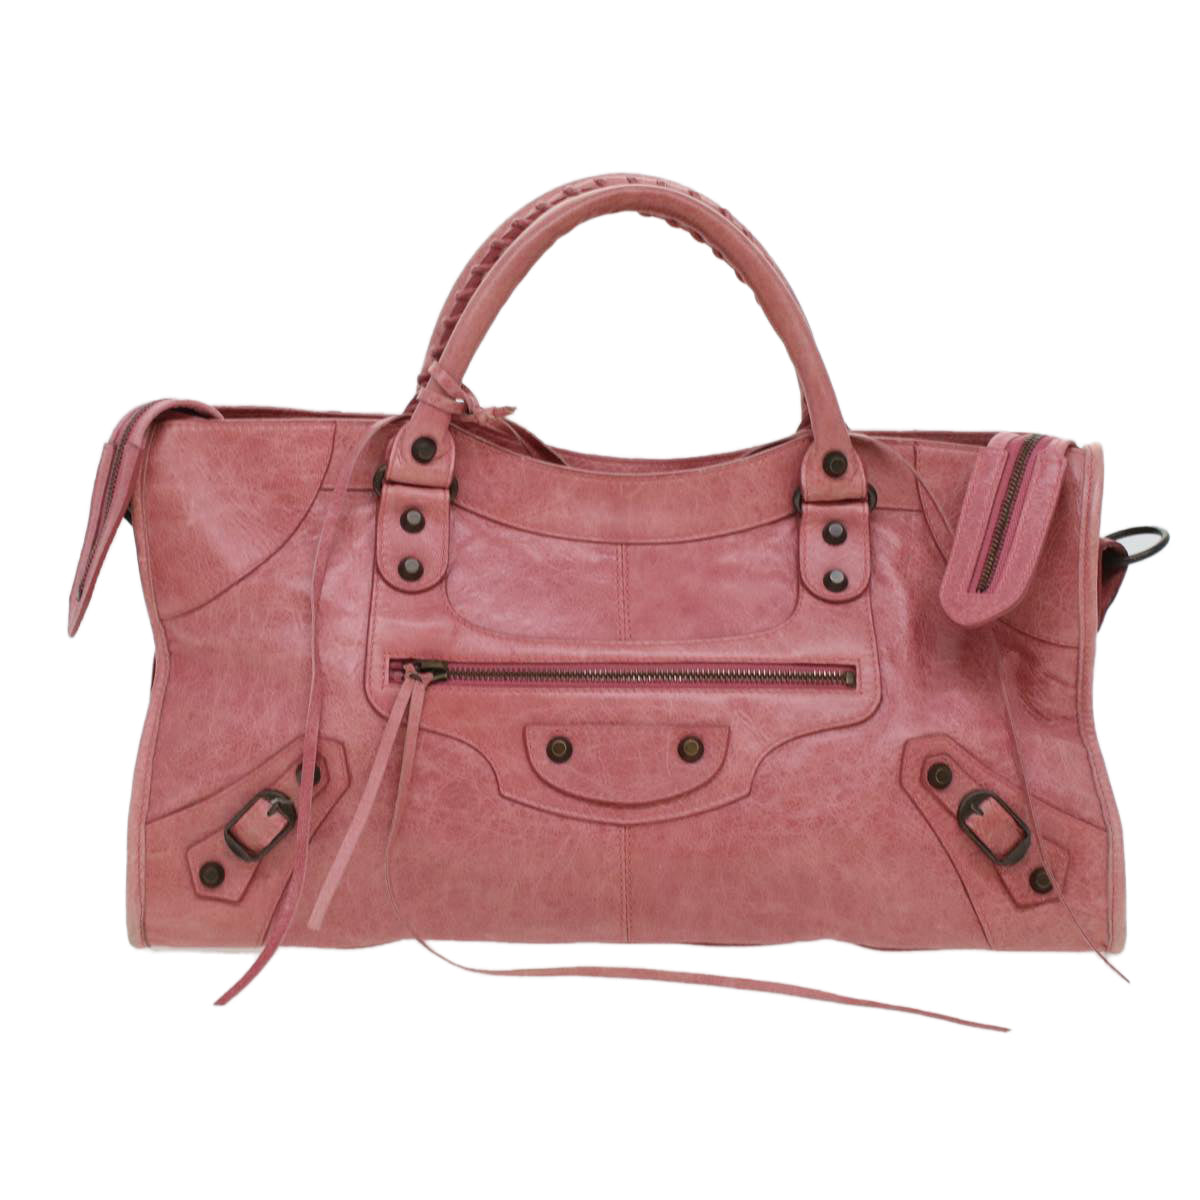 BALENCIAGA The Part Time Hand Bag Leather 2way Pink 168028 Auth am4413